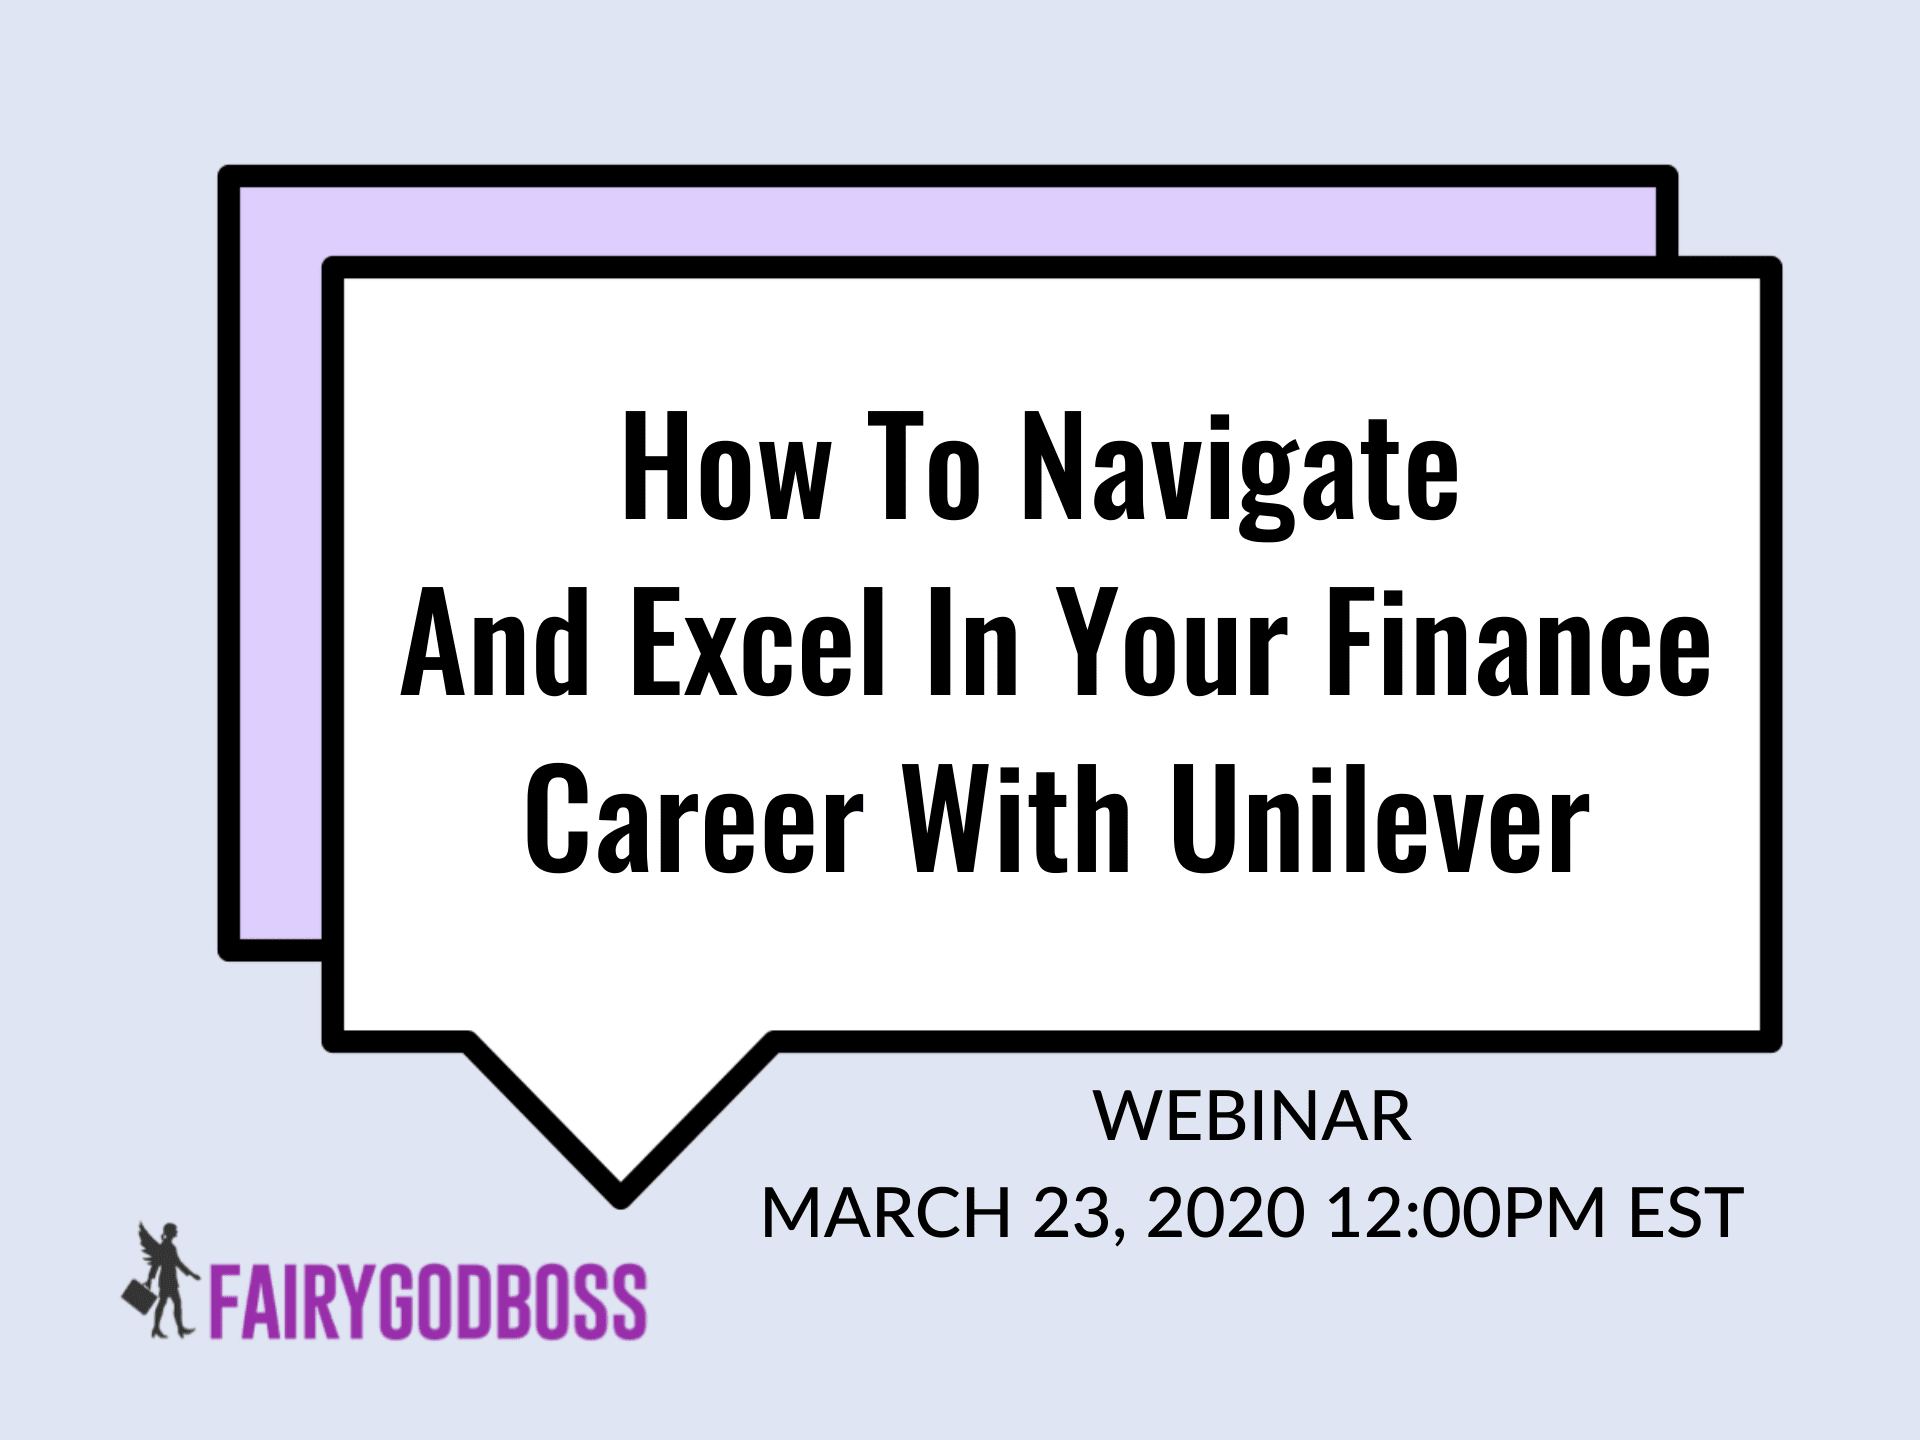 How To Navigate and Excel in Your Finance Career with Unilever